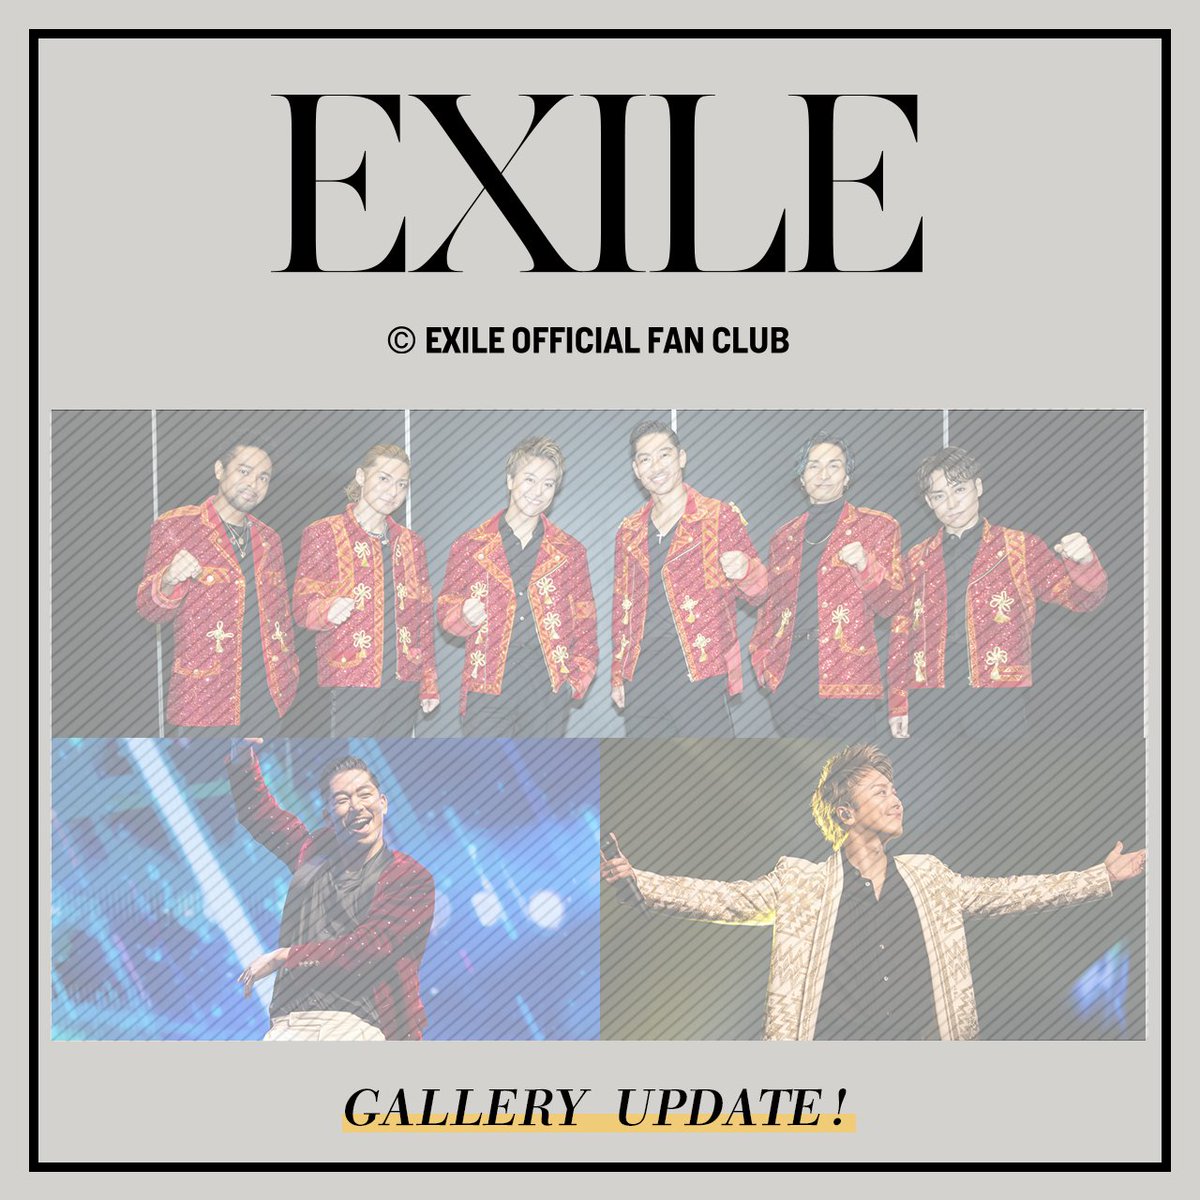 ／ #EXILEOFFICIALFANCLUB 限定 GALLERY更新✅ ＼ 2023/12/9(土)に開催された 『EXILE LIVE 2023 in TAIPEI』のLIVE PHOTOを公開！ 本日は… 複数SHOT , EXILE AKIRA & EXILE TAKAHIROのLIVE PHOTOをUP📸 是非チェックしてください！ exile.exfamily.jp/s/ldh01/diary/… @LDHofficialMB